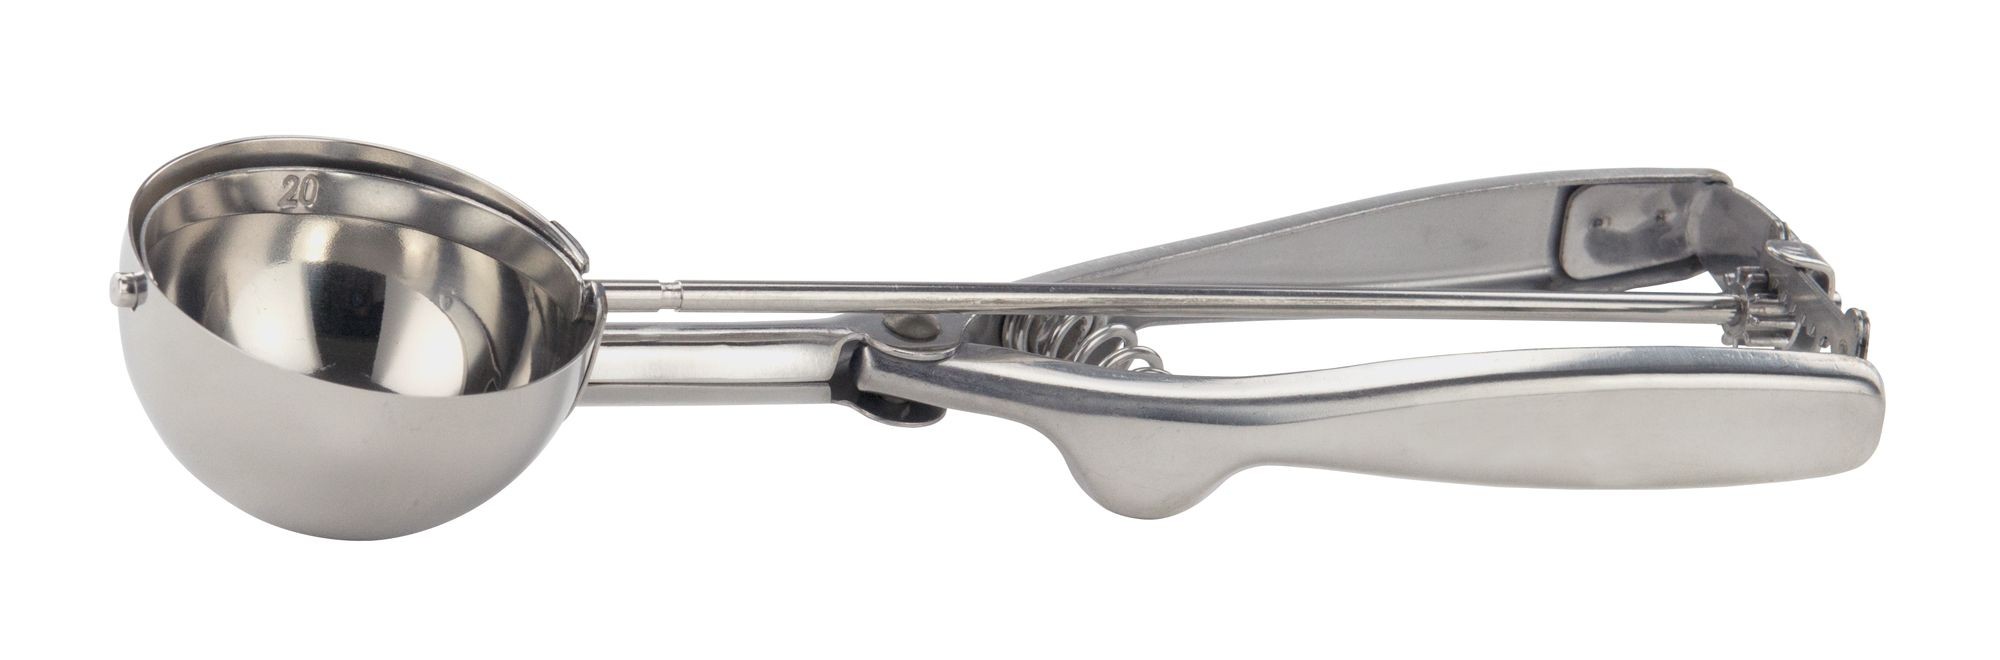 Winco ISS-20 Stainless Steel 2-1/2 oz. Disher/Portioner, Size 20